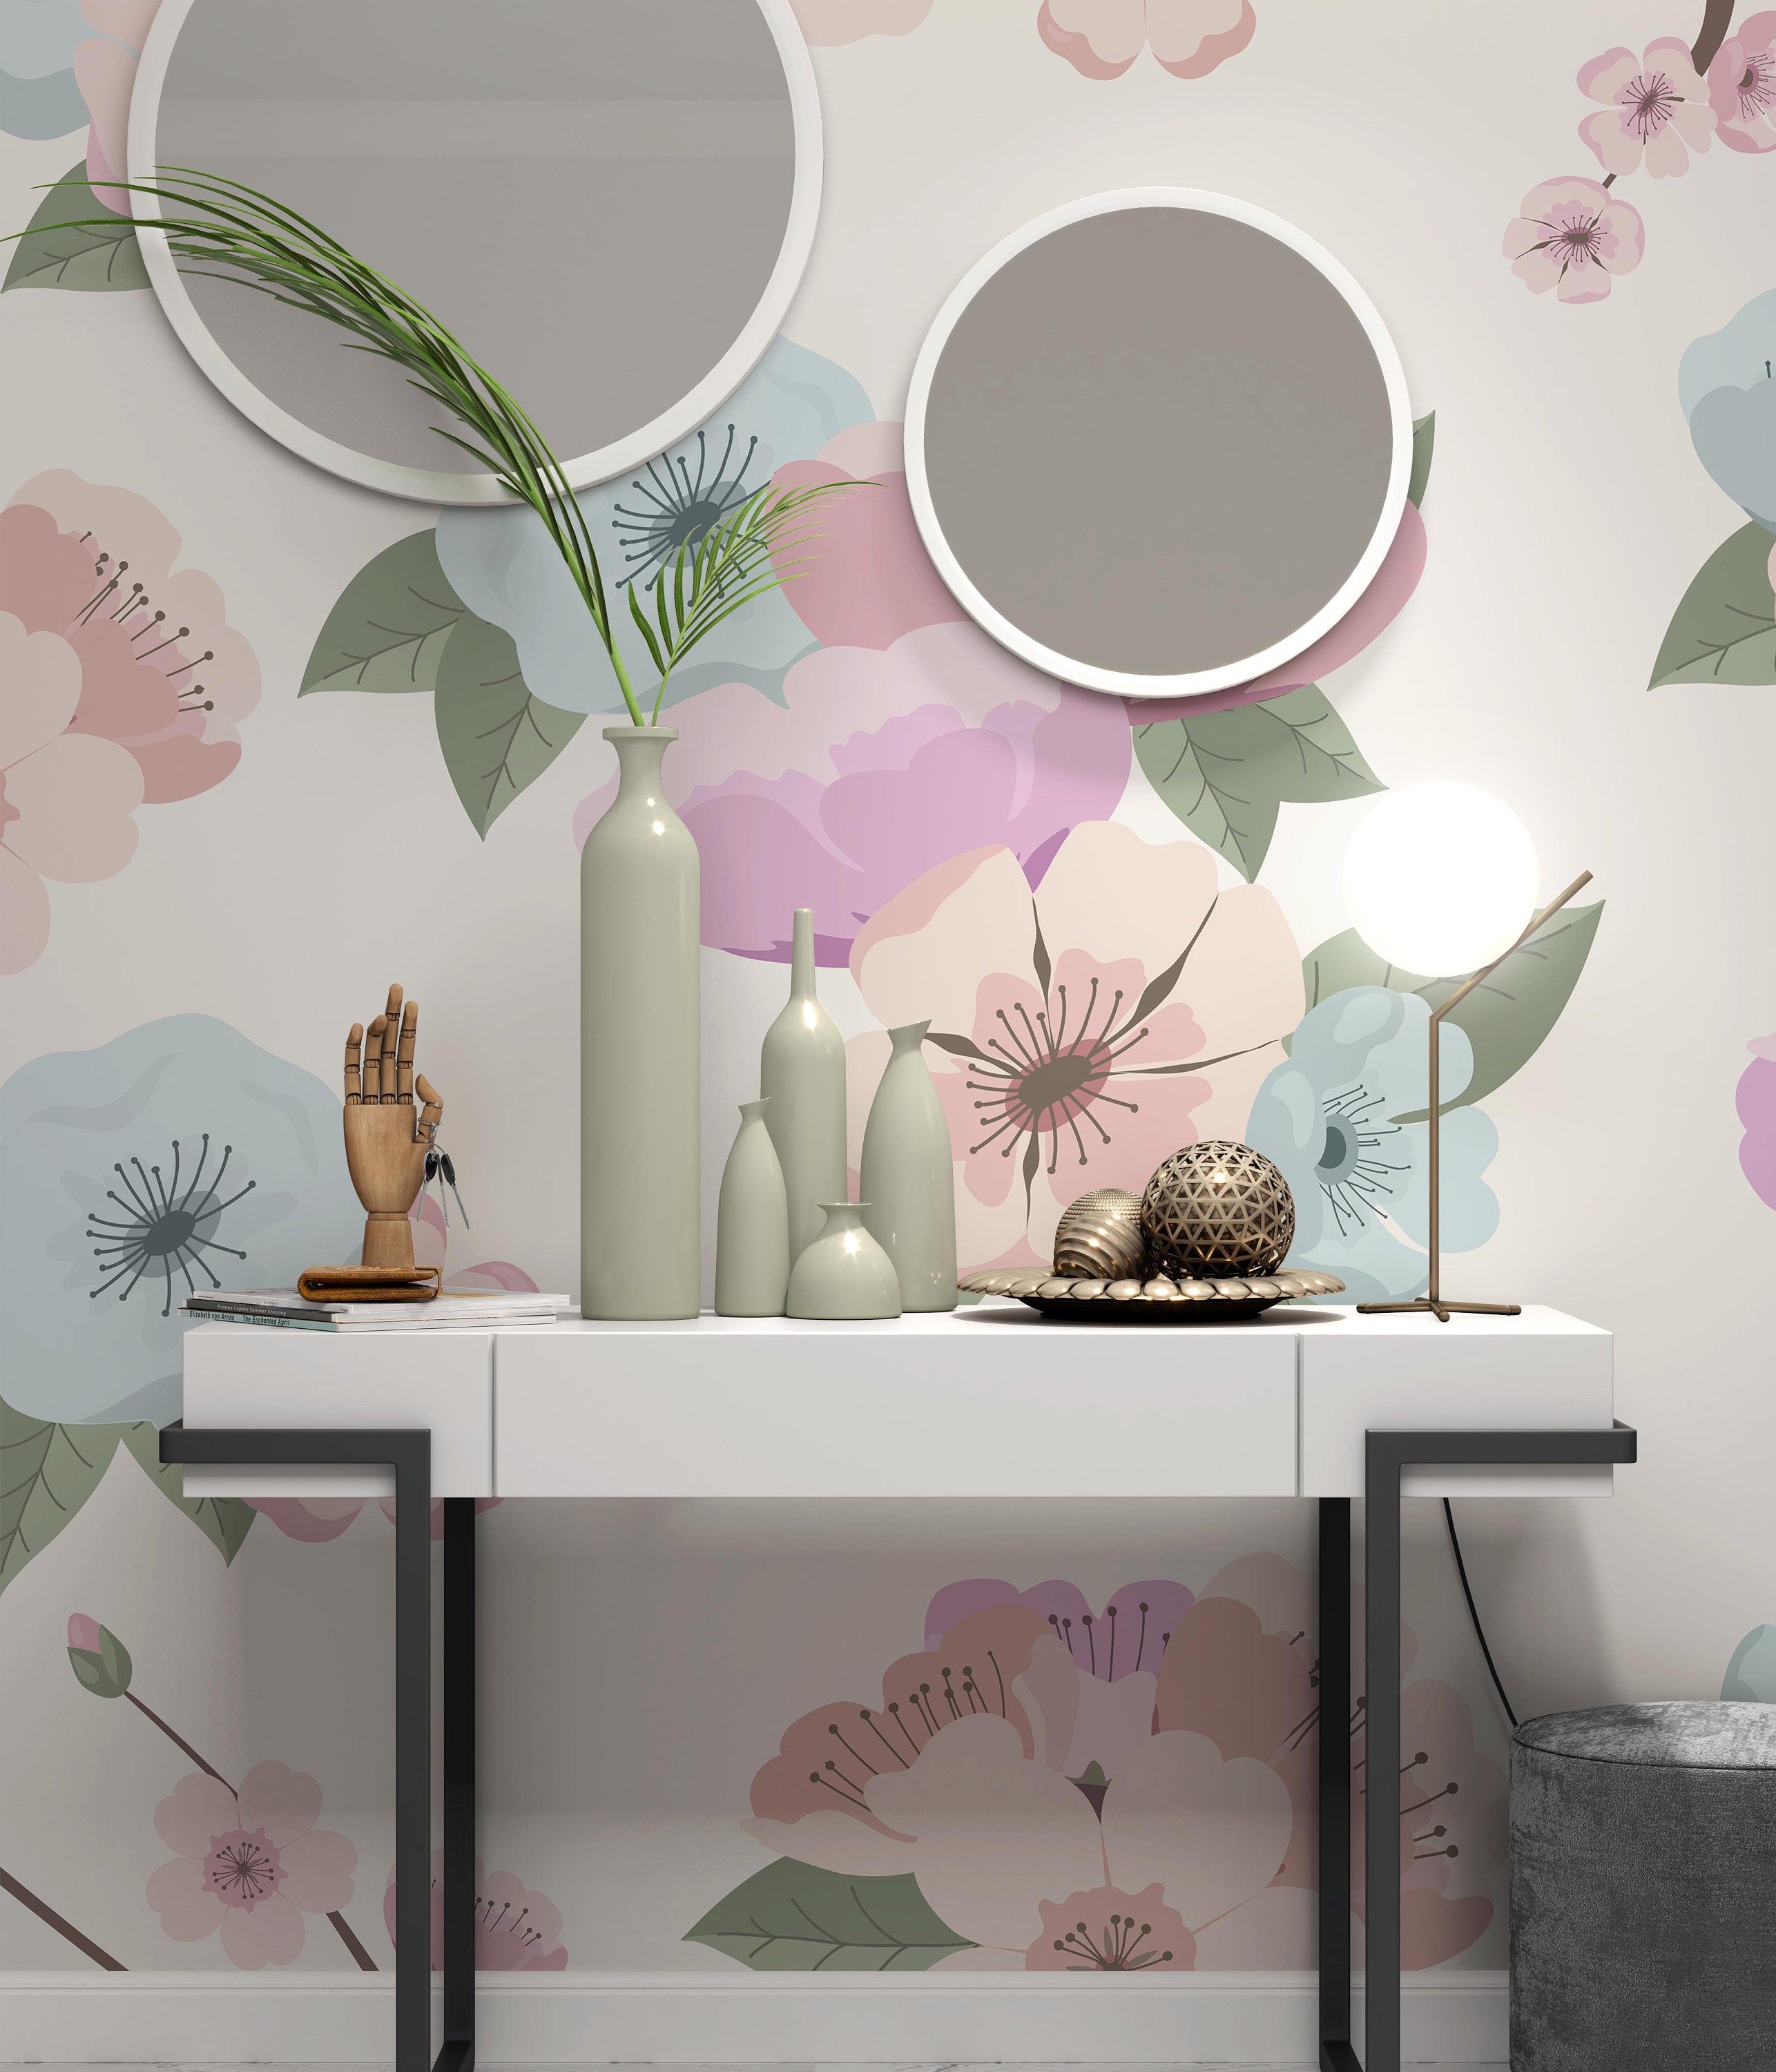 Colorful Garden Flowers Floral Background Wallpaper Self Adhesive Peel and Stick Wall Sticker Wall Decoration Scandinavian Design